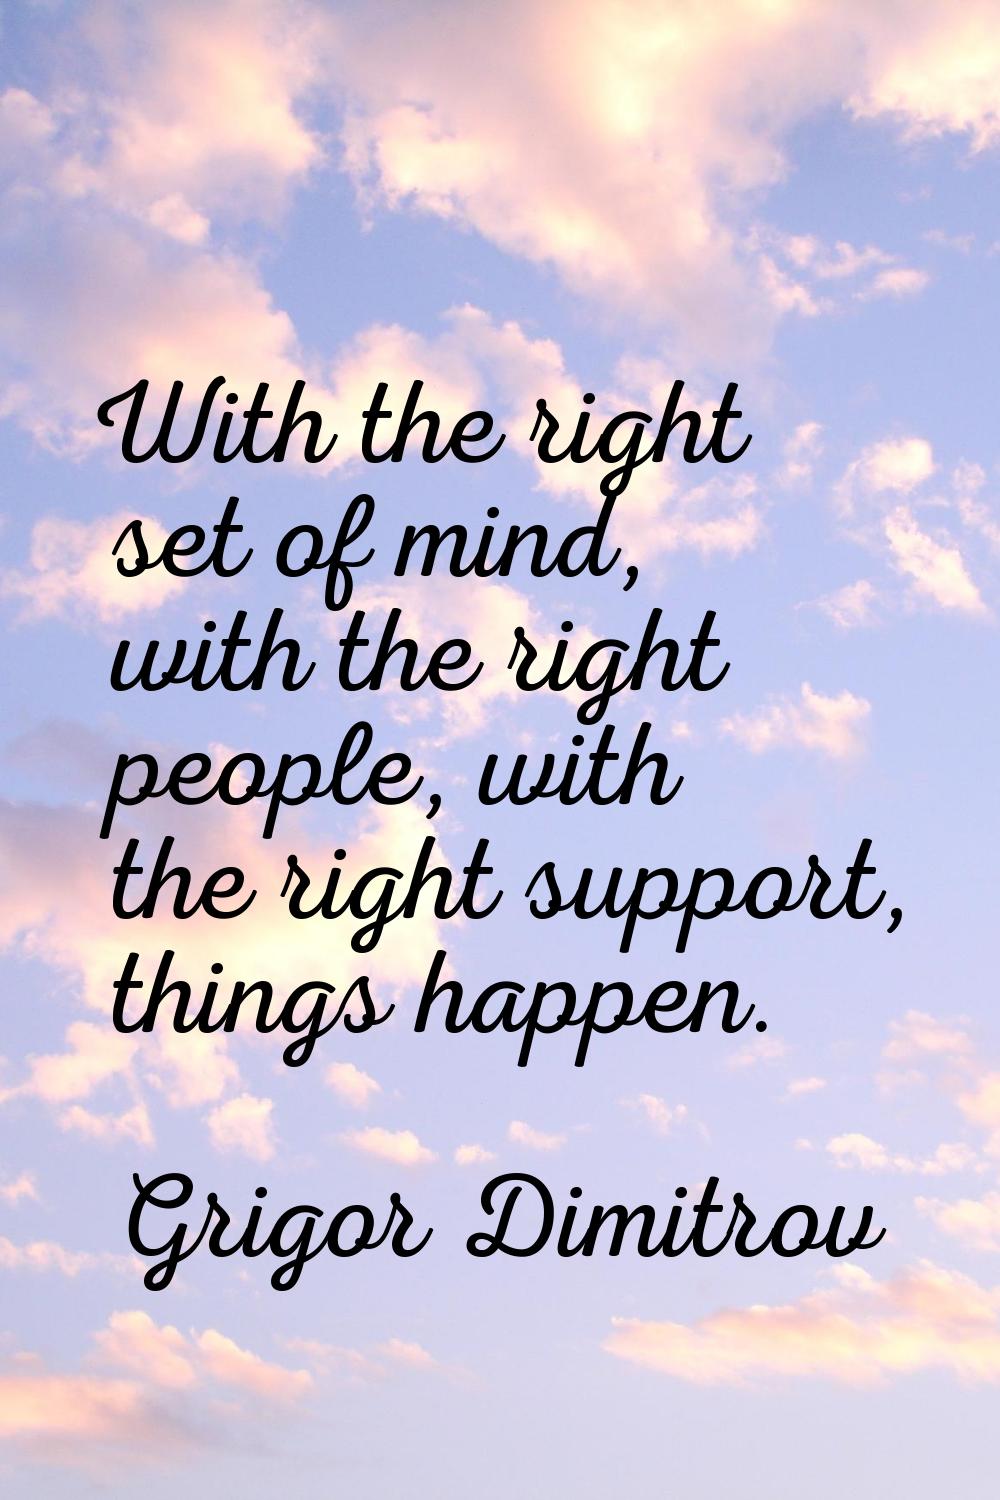 With the right set of mind, with the right people, with the right support, things happen.